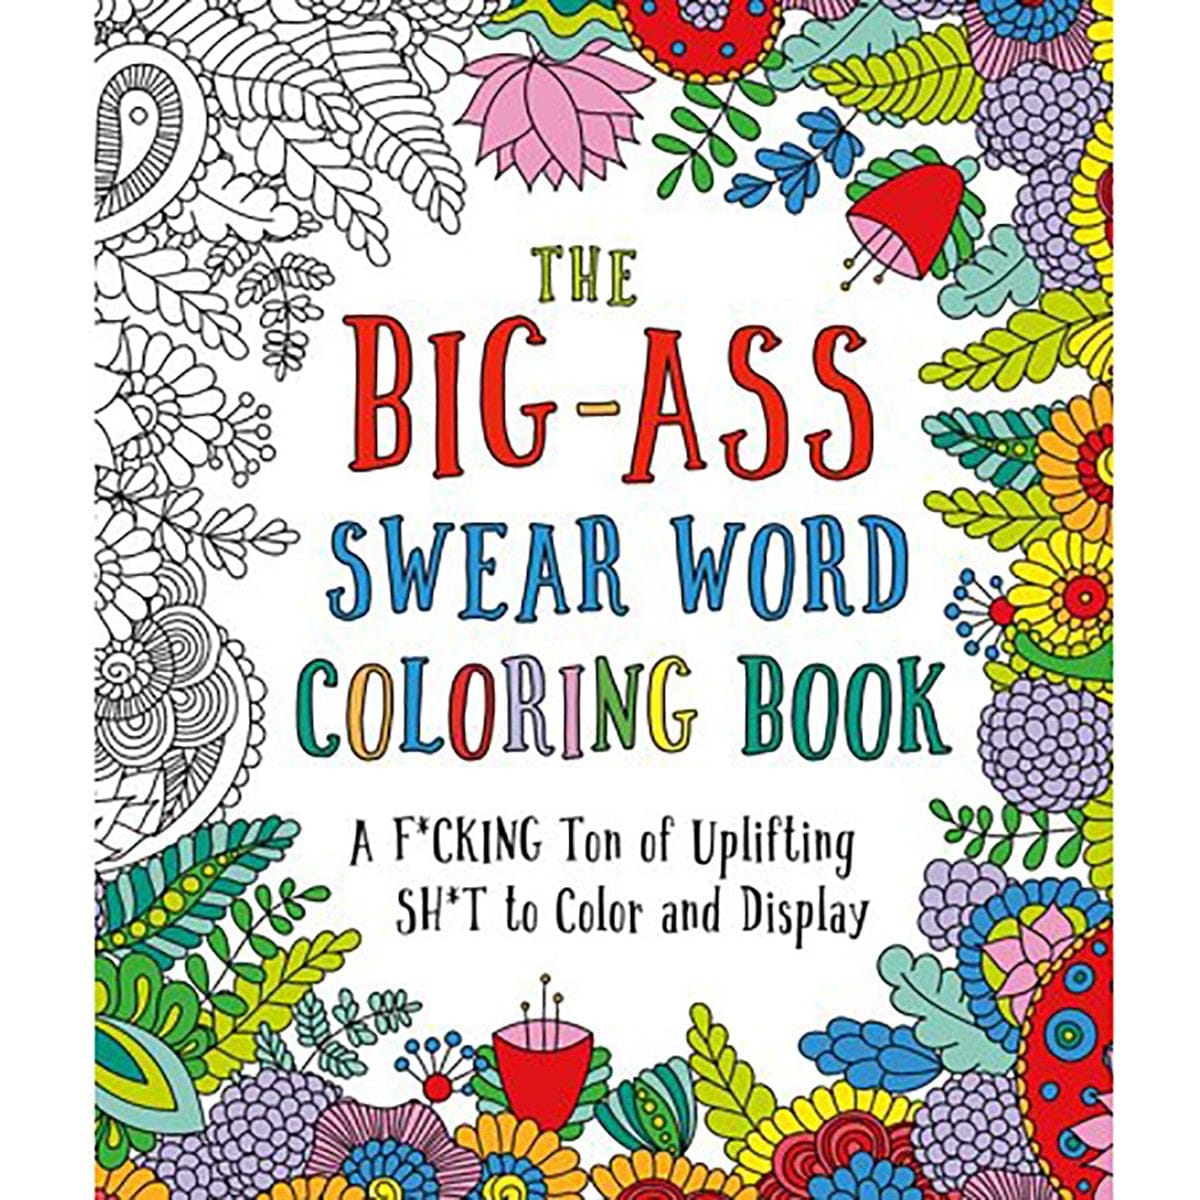 THE BIG-ASS SWEAR WORD COLORING BOOK by St. Martin's Griffin - rolik